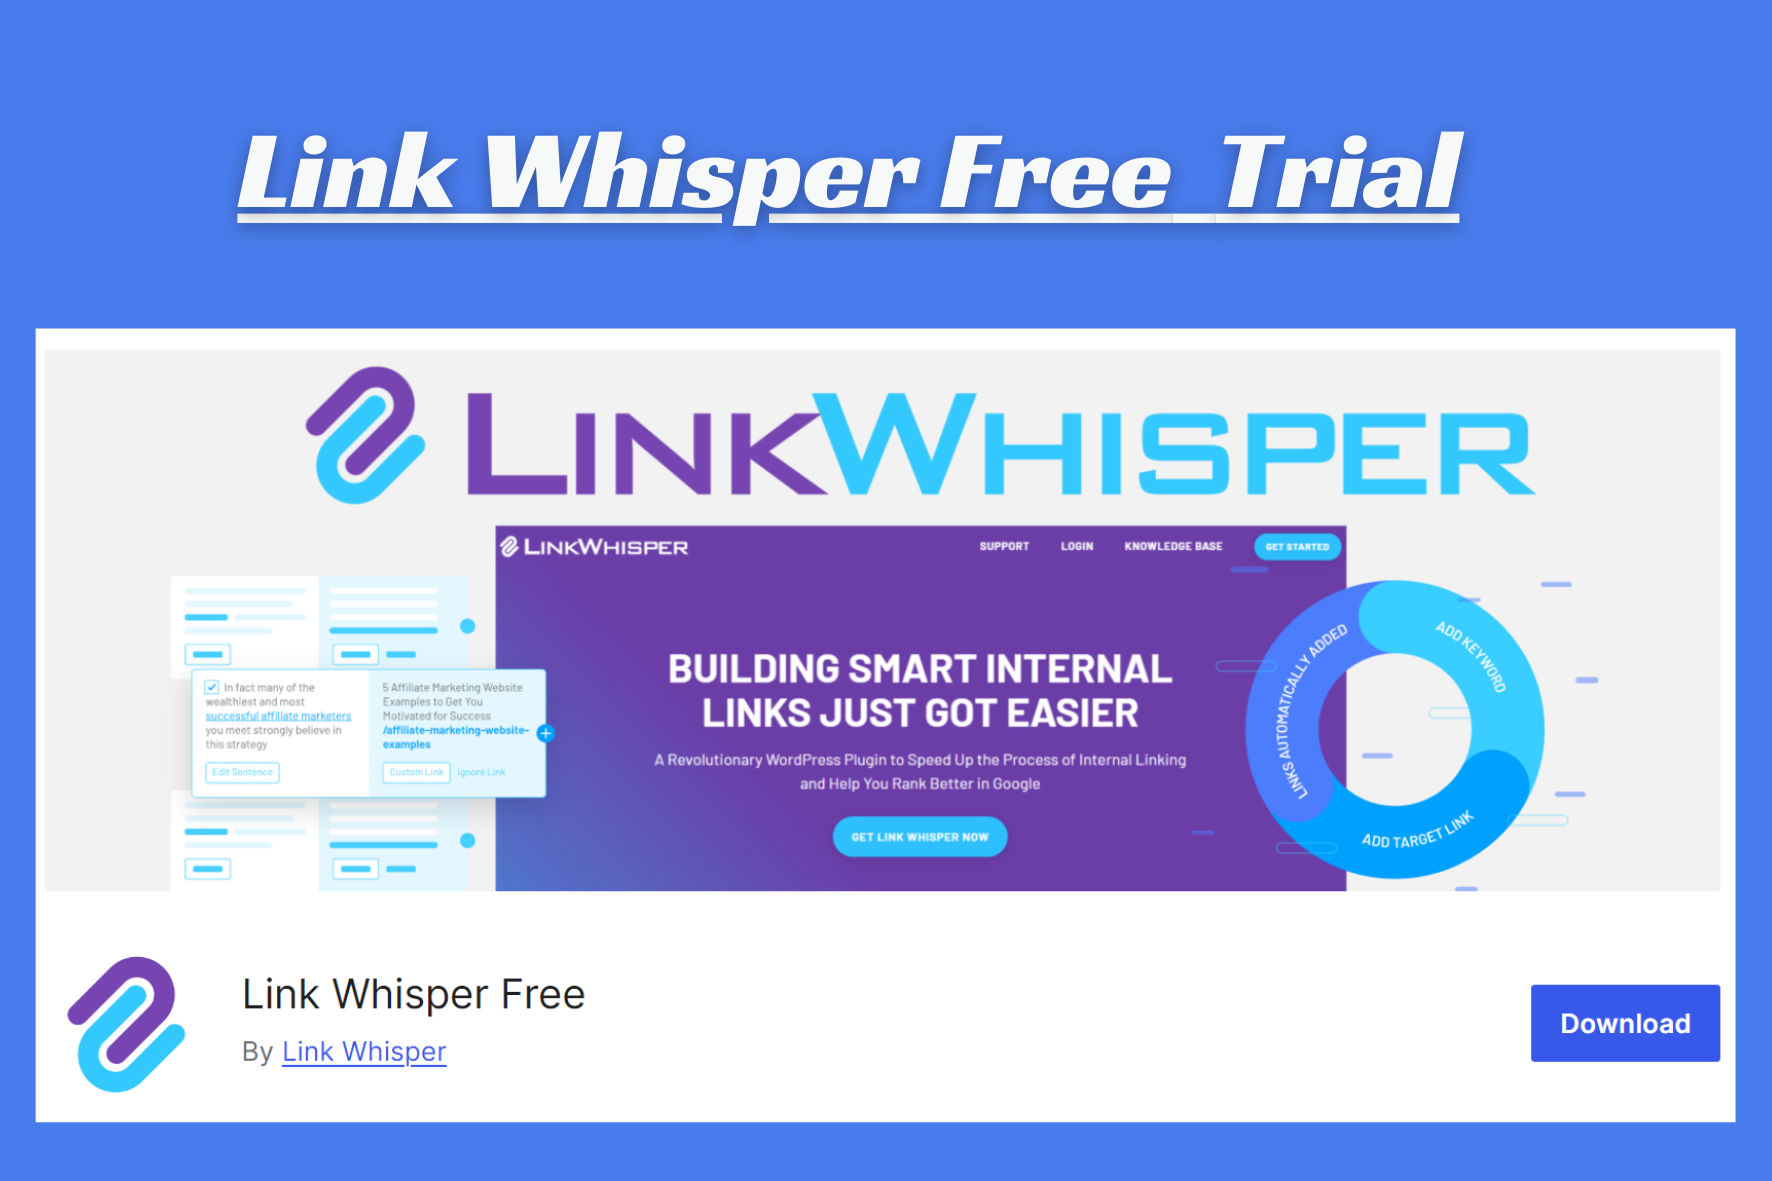 How to activate Link Whisper Free Trial (Hidden gem)